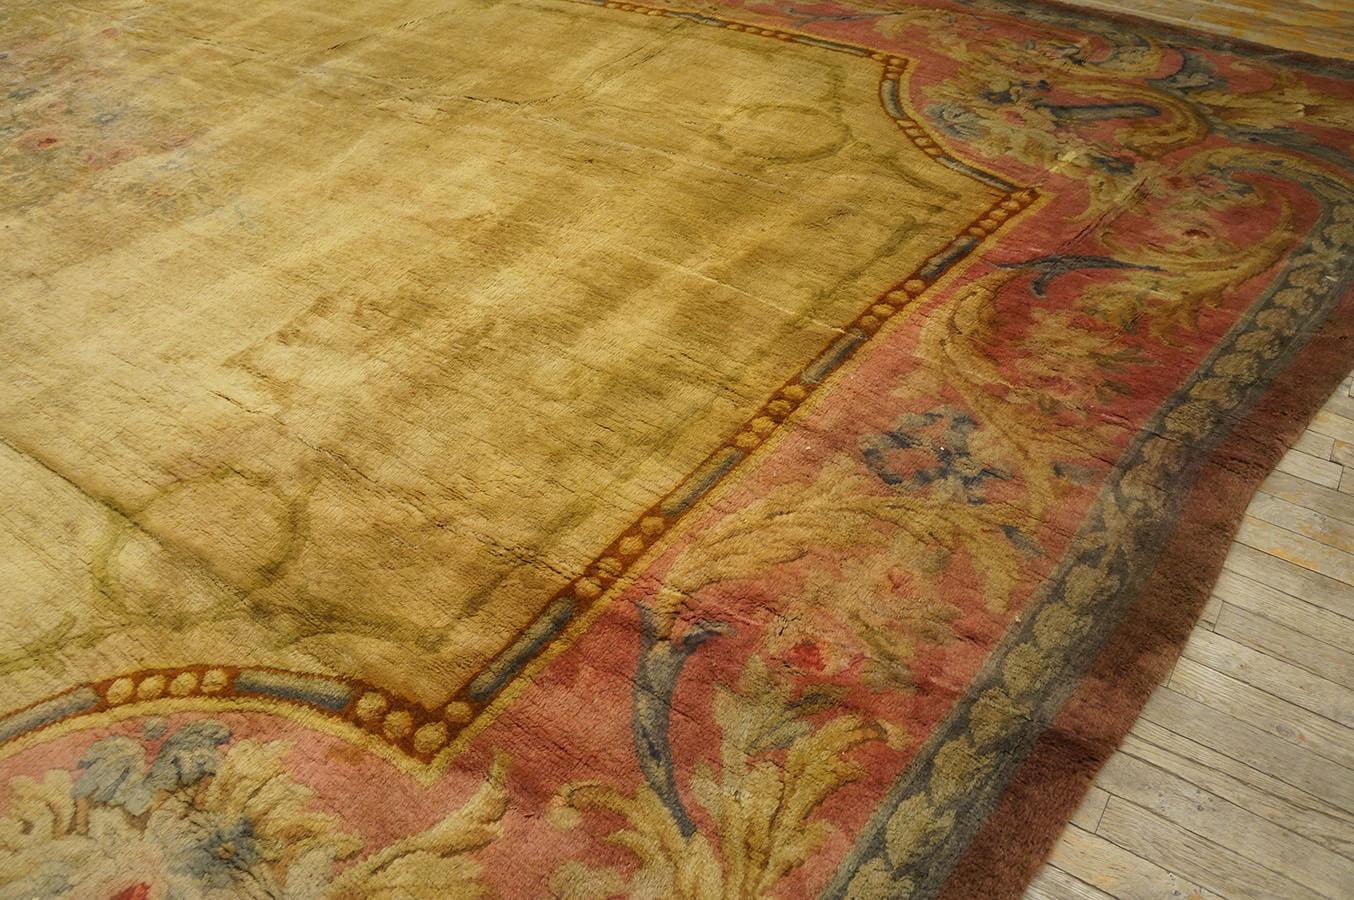 Late 19th Century French Savonnerie Carpet (12' 3'' x 21' - 375 x 640 cm ) For Sale 4